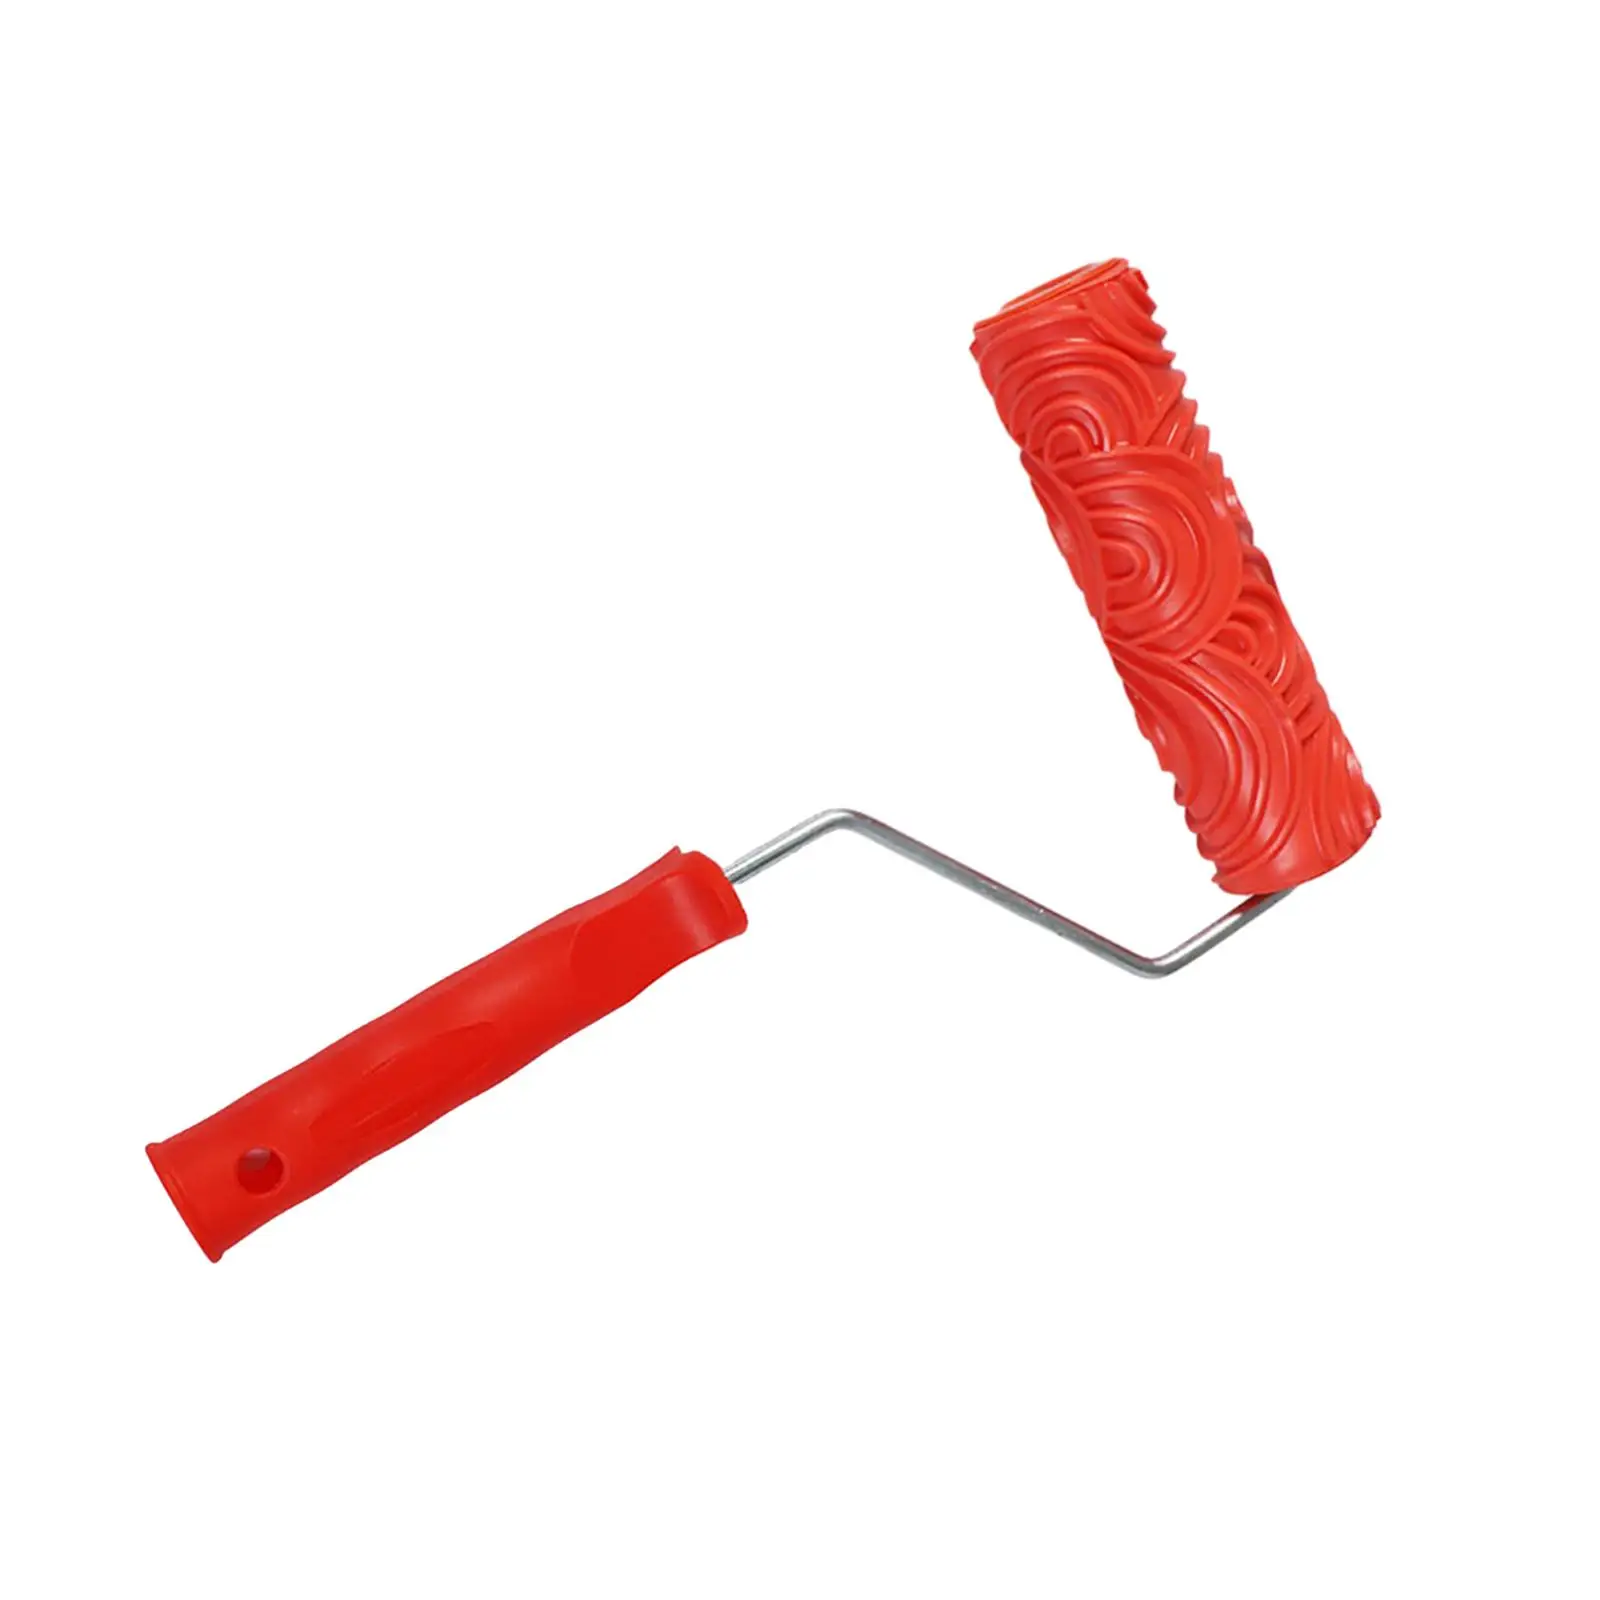 180mm Texture Rubber Paint Roller Brush Accessory DIY Paint Art Tool for Walls and Ceilings to Furniture and Cabinets Red